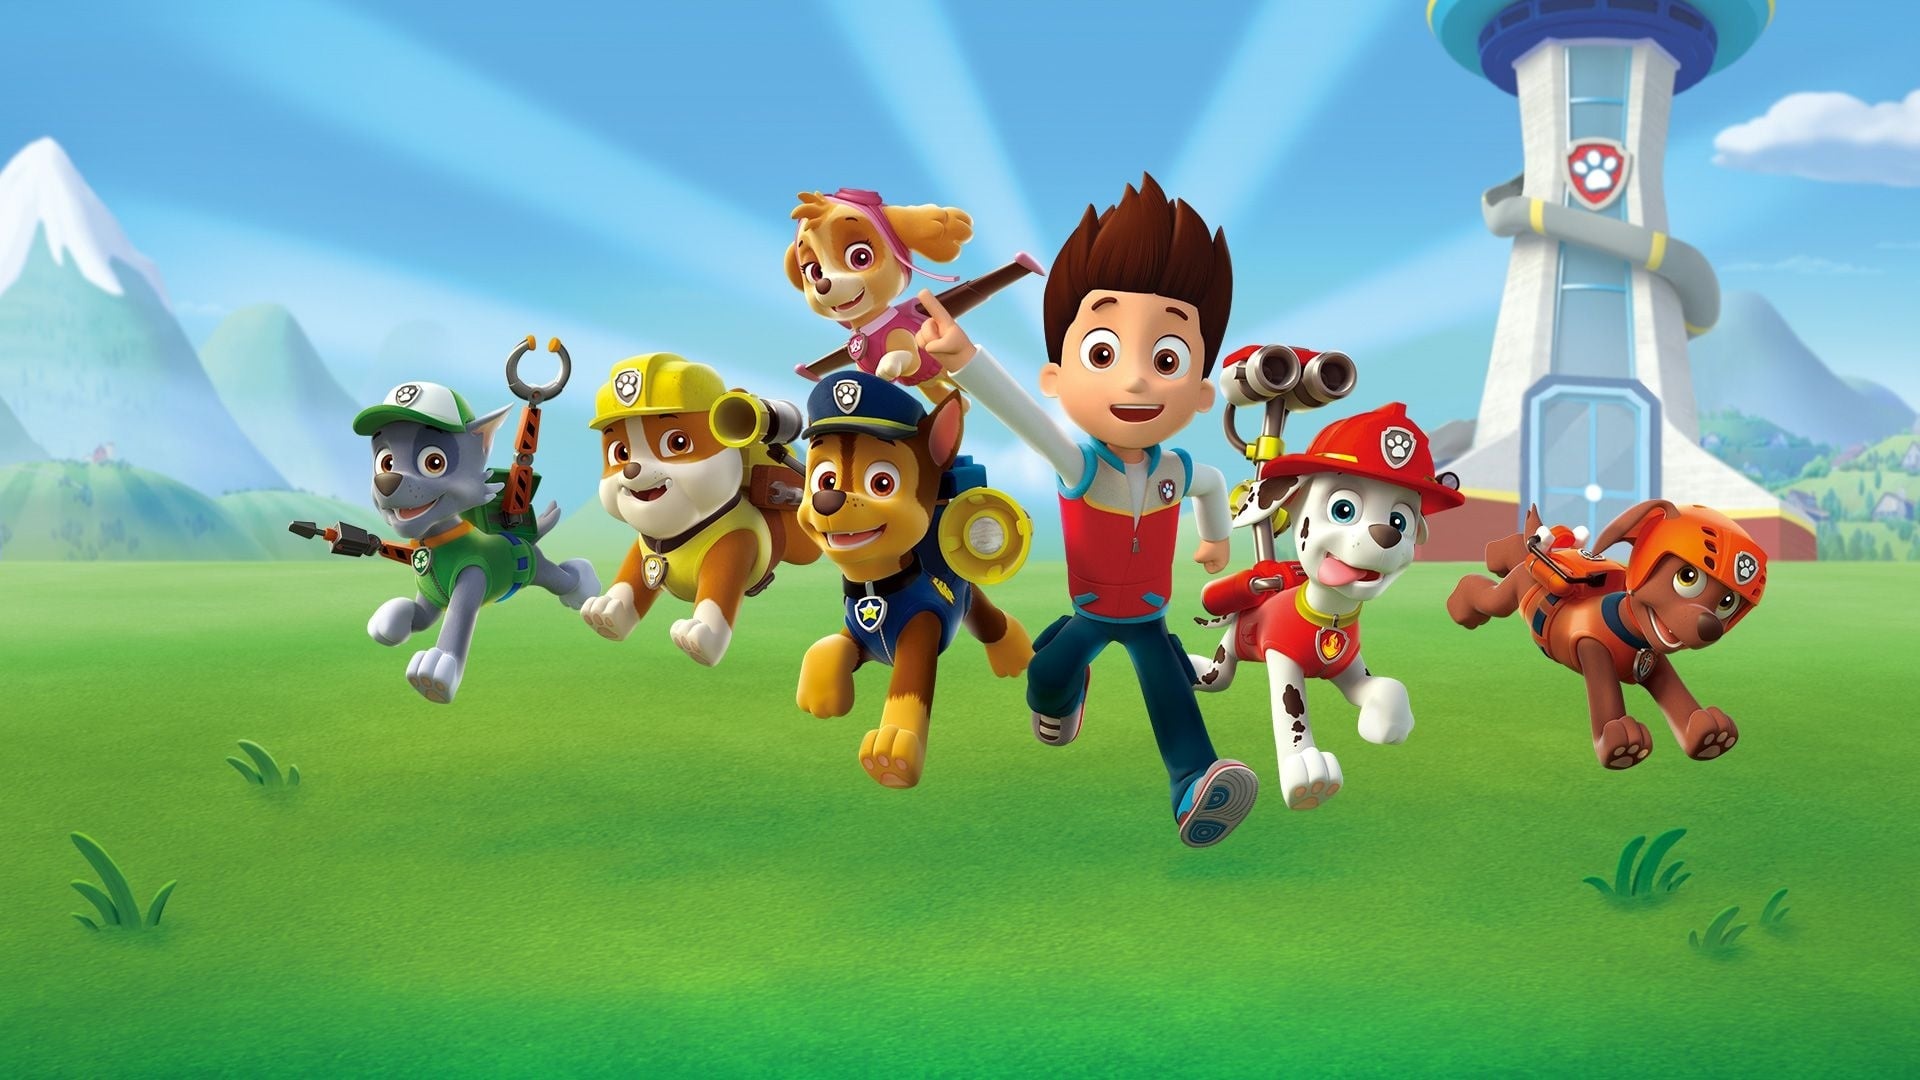 Paw Patrol TV series, Animated adventure, Canine squad, Rescue missions, 1920x1080 Full HD Desktop